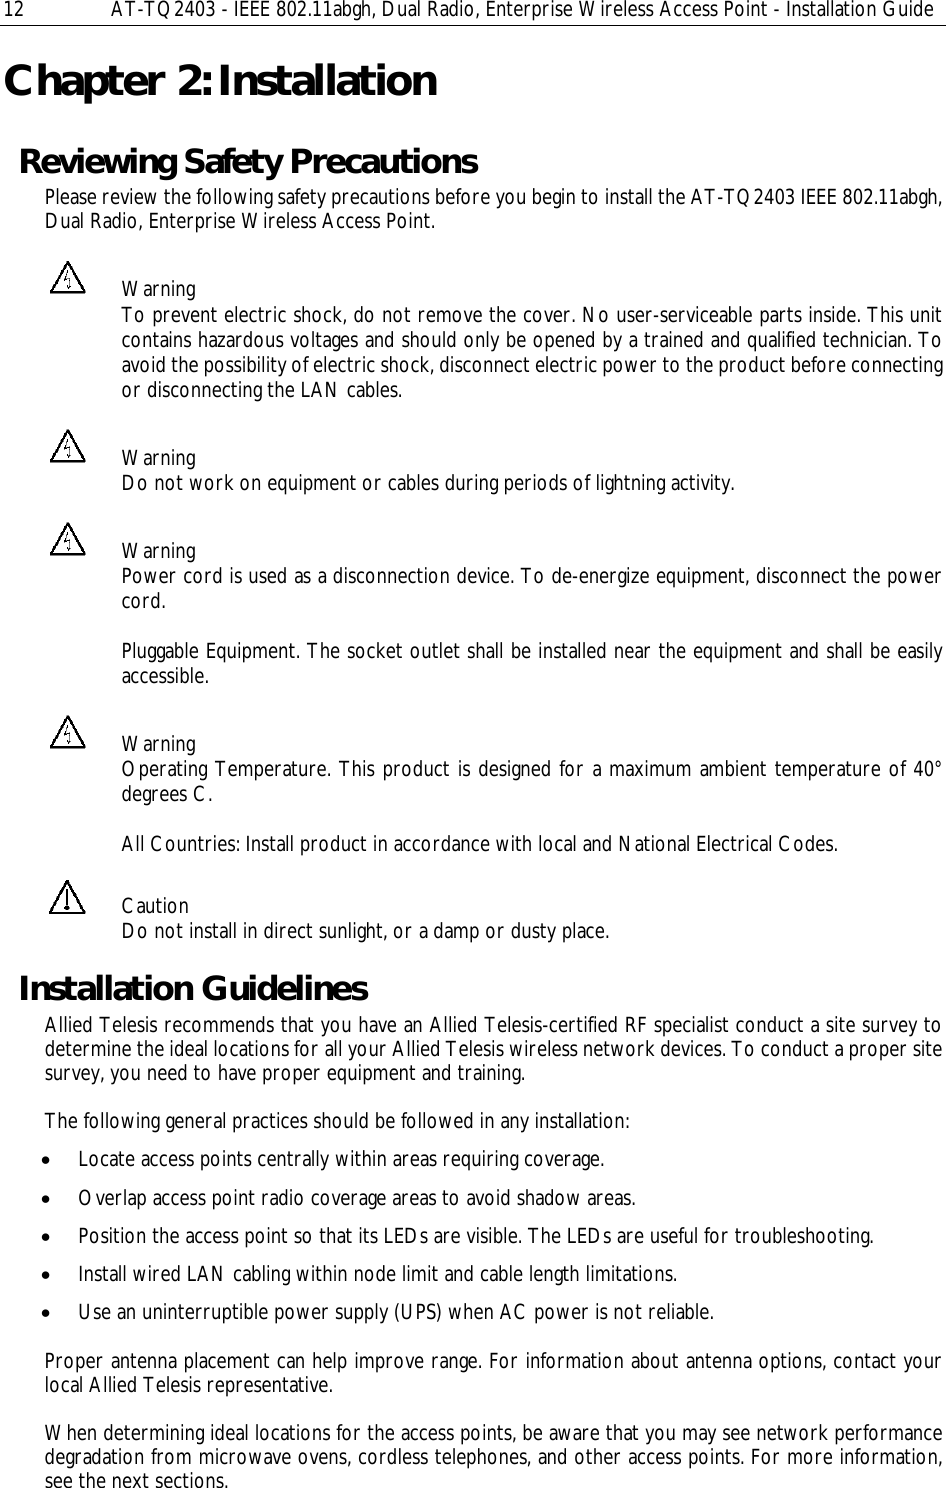 12  AT-TQ2403 - IEEE 802.11abgh, Dual Radio, Enterprise Wireless Access Point - Installation Guide Chapter 2: Installation Reviewing Safety Precautions Please review the following safety precautions before you begin to install the AT-TQ2403 IEEE 802.11abgh, Dual Radio, Enterprise Wireless Access Point.  Warning To prevent electric shock, do not remove the cover. No user-serviceable parts inside. This unit contains hazardous voltages and should only be opened by a trained and qualified technician. To avoid the possibility of electric shock, disconnect electric power to the product before connecting or disconnecting the LAN cables.  Warning Do not work on equipment or cables during periods of lightning activity.  Warning Power cord is used as a disconnection device. To de-energize equipment, disconnect the power cord.  Pluggable Equipment. The socket outlet shall be installed near the equipment and shall be easily accessible.  Warning Operating Temperature. This product is designed for a maximum ambient temperature of 40° degrees C.  All Countries: Install product in accordance with local and National Electrical Codes.  Caution Do not install in direct sunlight, or a damp or dusty place. Installation Guidelines Allied Telesis recommends that you have an Allied Telesis-certified RF specialist conduct a site survey to determine the ideal locations for all your Allied Telesis wireless network devices. To conduct a proper site survey, you need to have proper equipment and training.  The following general practices should be followed in any installation: • Locate access points centrally within areas requiring coverage. • Overlap access point radio coverage areas to avoid shadow areas. • Position the access point so that its LEDs are visible. The LEDs are useful for troubleshooting. • Install wired LAN cabling within node limit and cable length limitations. • Use an uninterruptible power supply (UPS) when AC power is not reliable.   Proper antenna placement can help improve range. For information about antenna options, contact your local Allied Telesis representative.   When determining ideal locations for the access points, be aware that you may see network performance degradation from microwave ovens, cordless telephones, and other access points. For more information, see the next sections. 